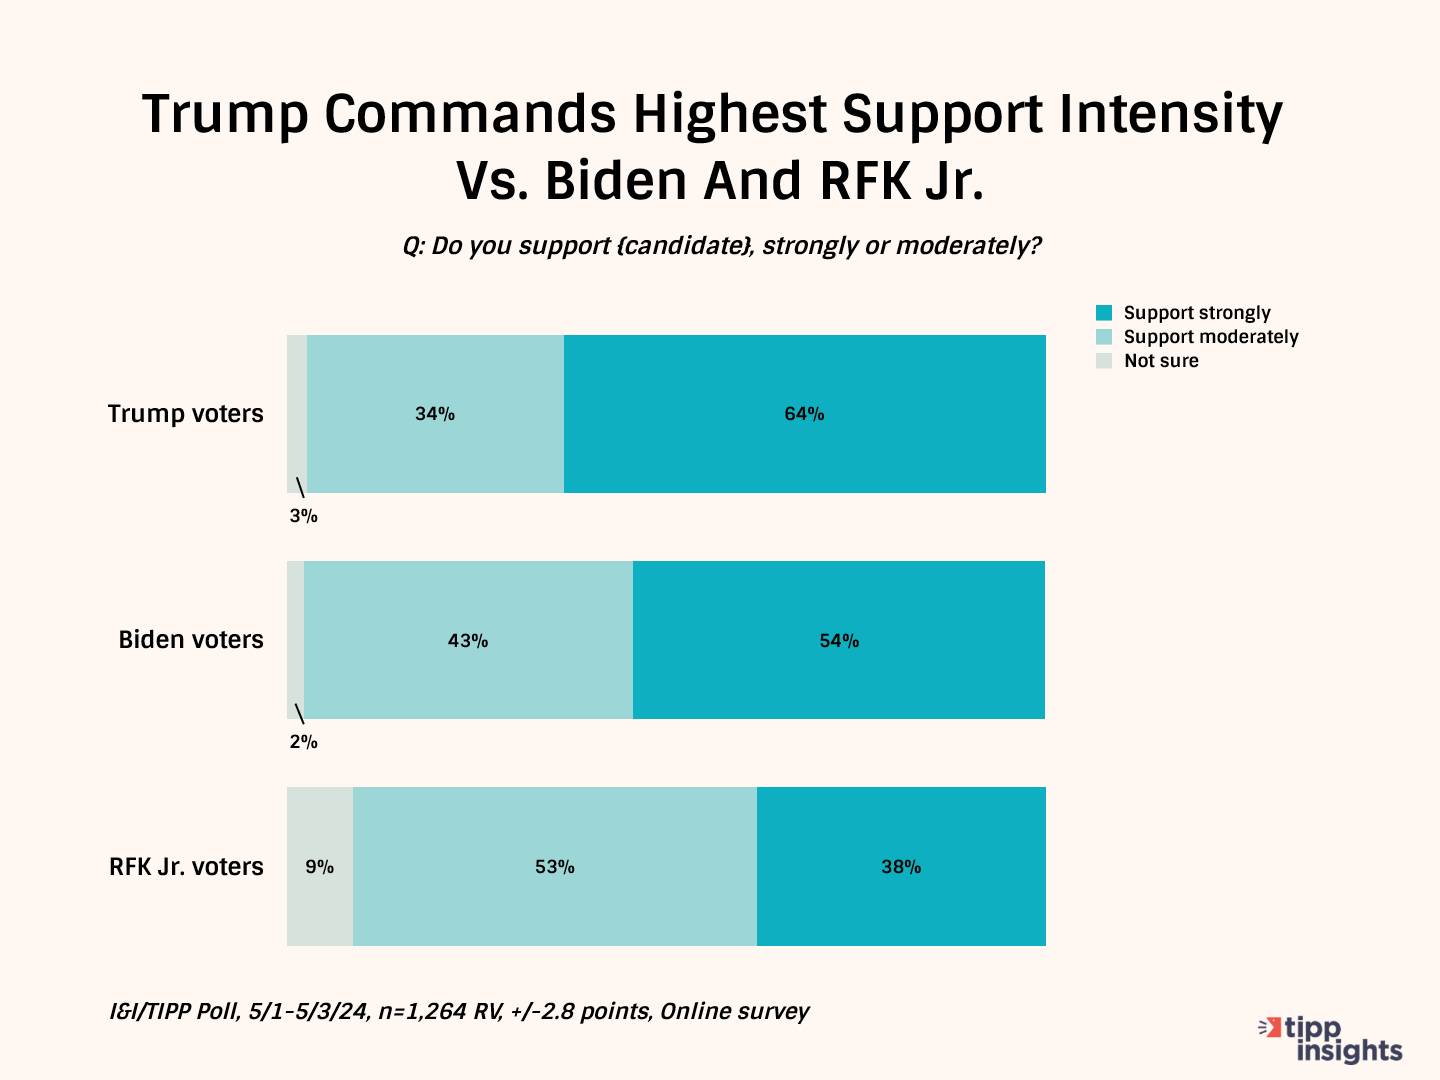 Biden And Trump Neck-And Neck, But Most Americans Think Trump Will Win: I&I/TIPP Poll